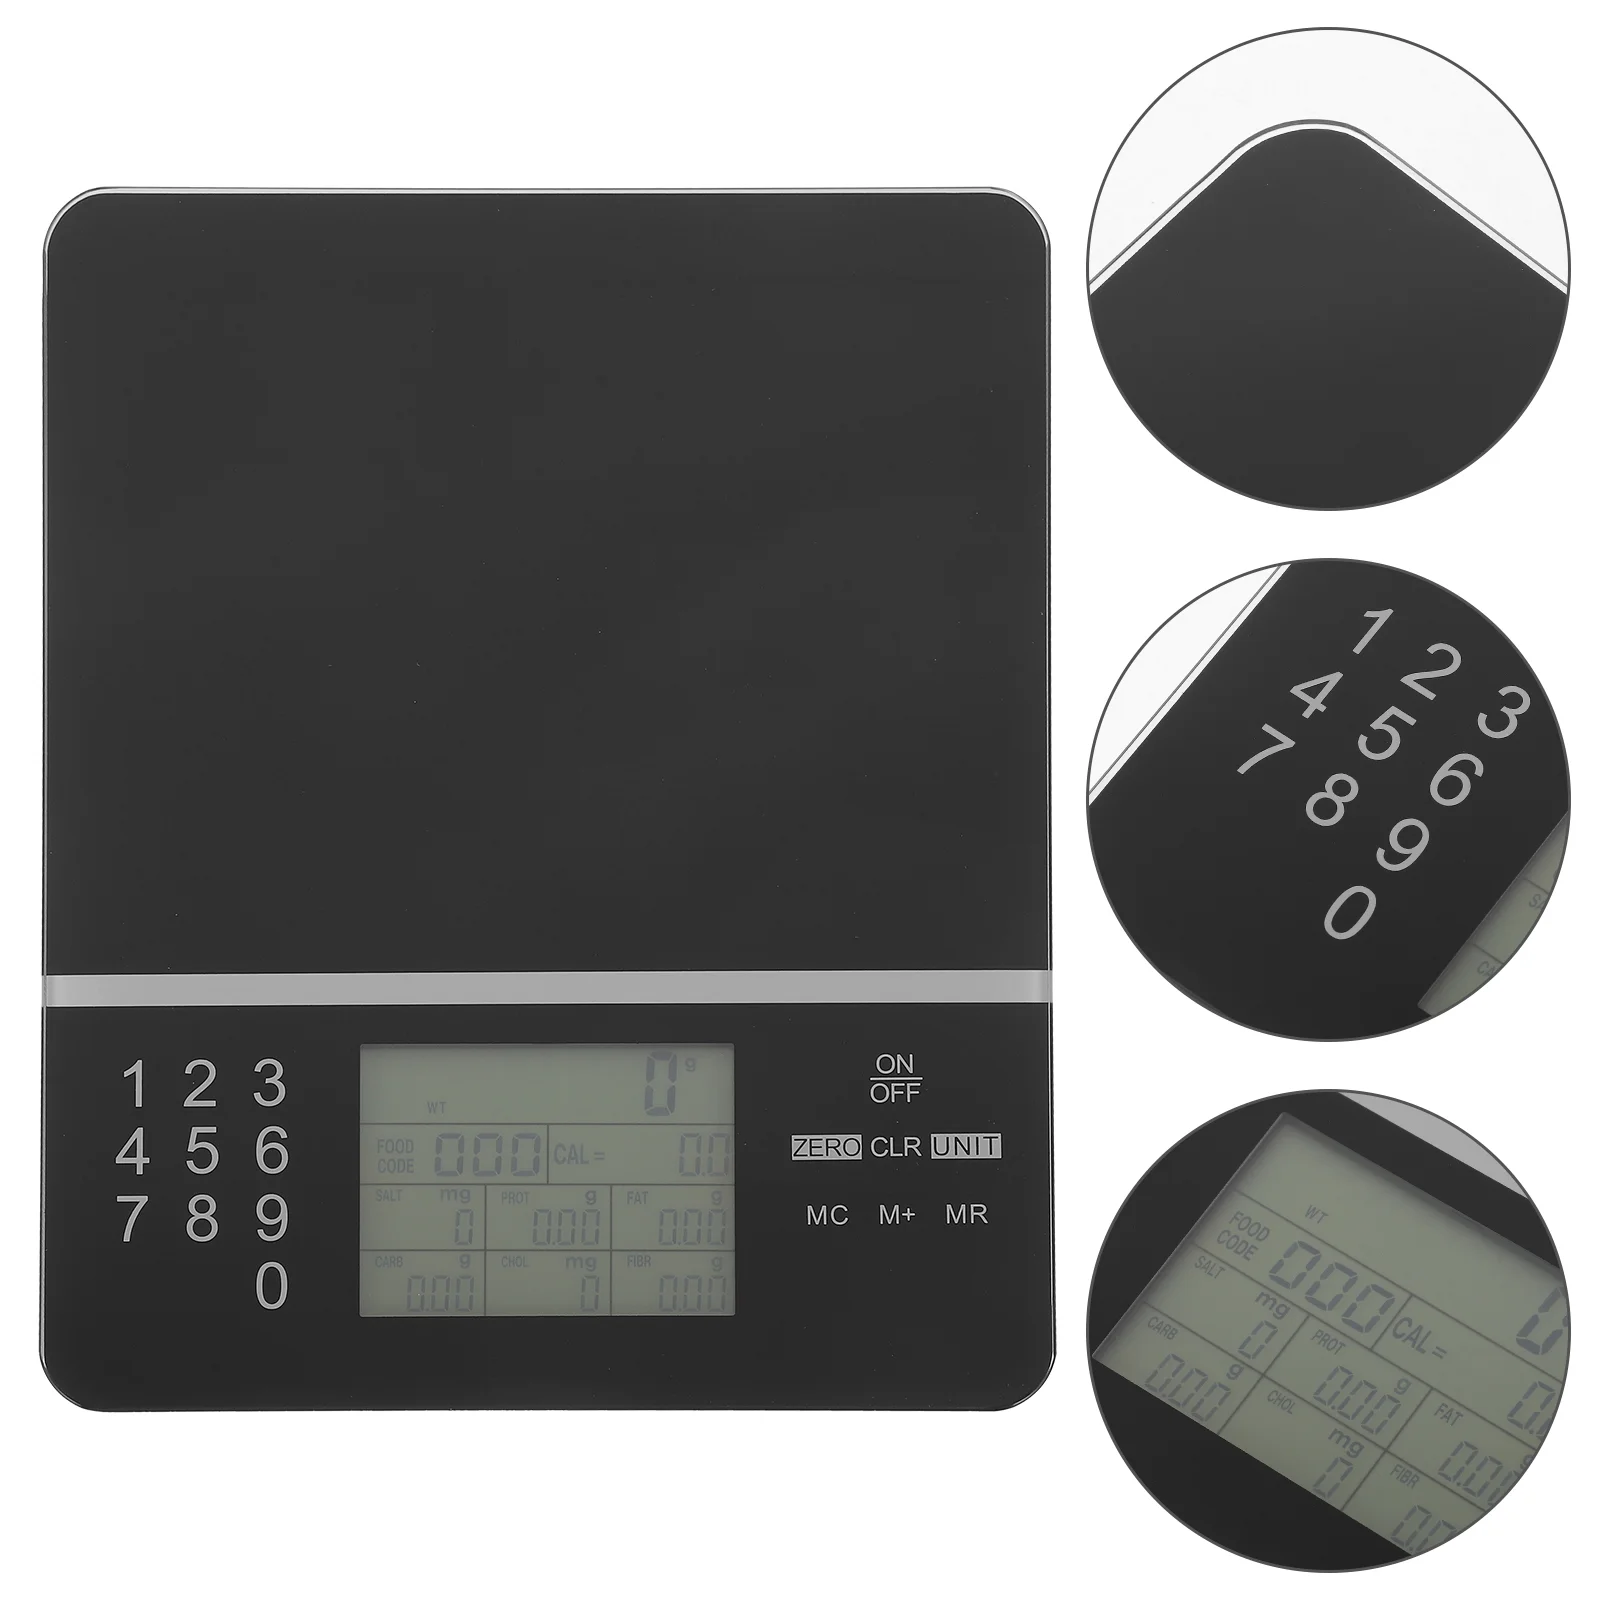 

Scale Kitchen Food Weight Grams Digital Accurate Meat Cooking Highly Scales Baking Ounces Weigh Precise Weighing Equipment Mini